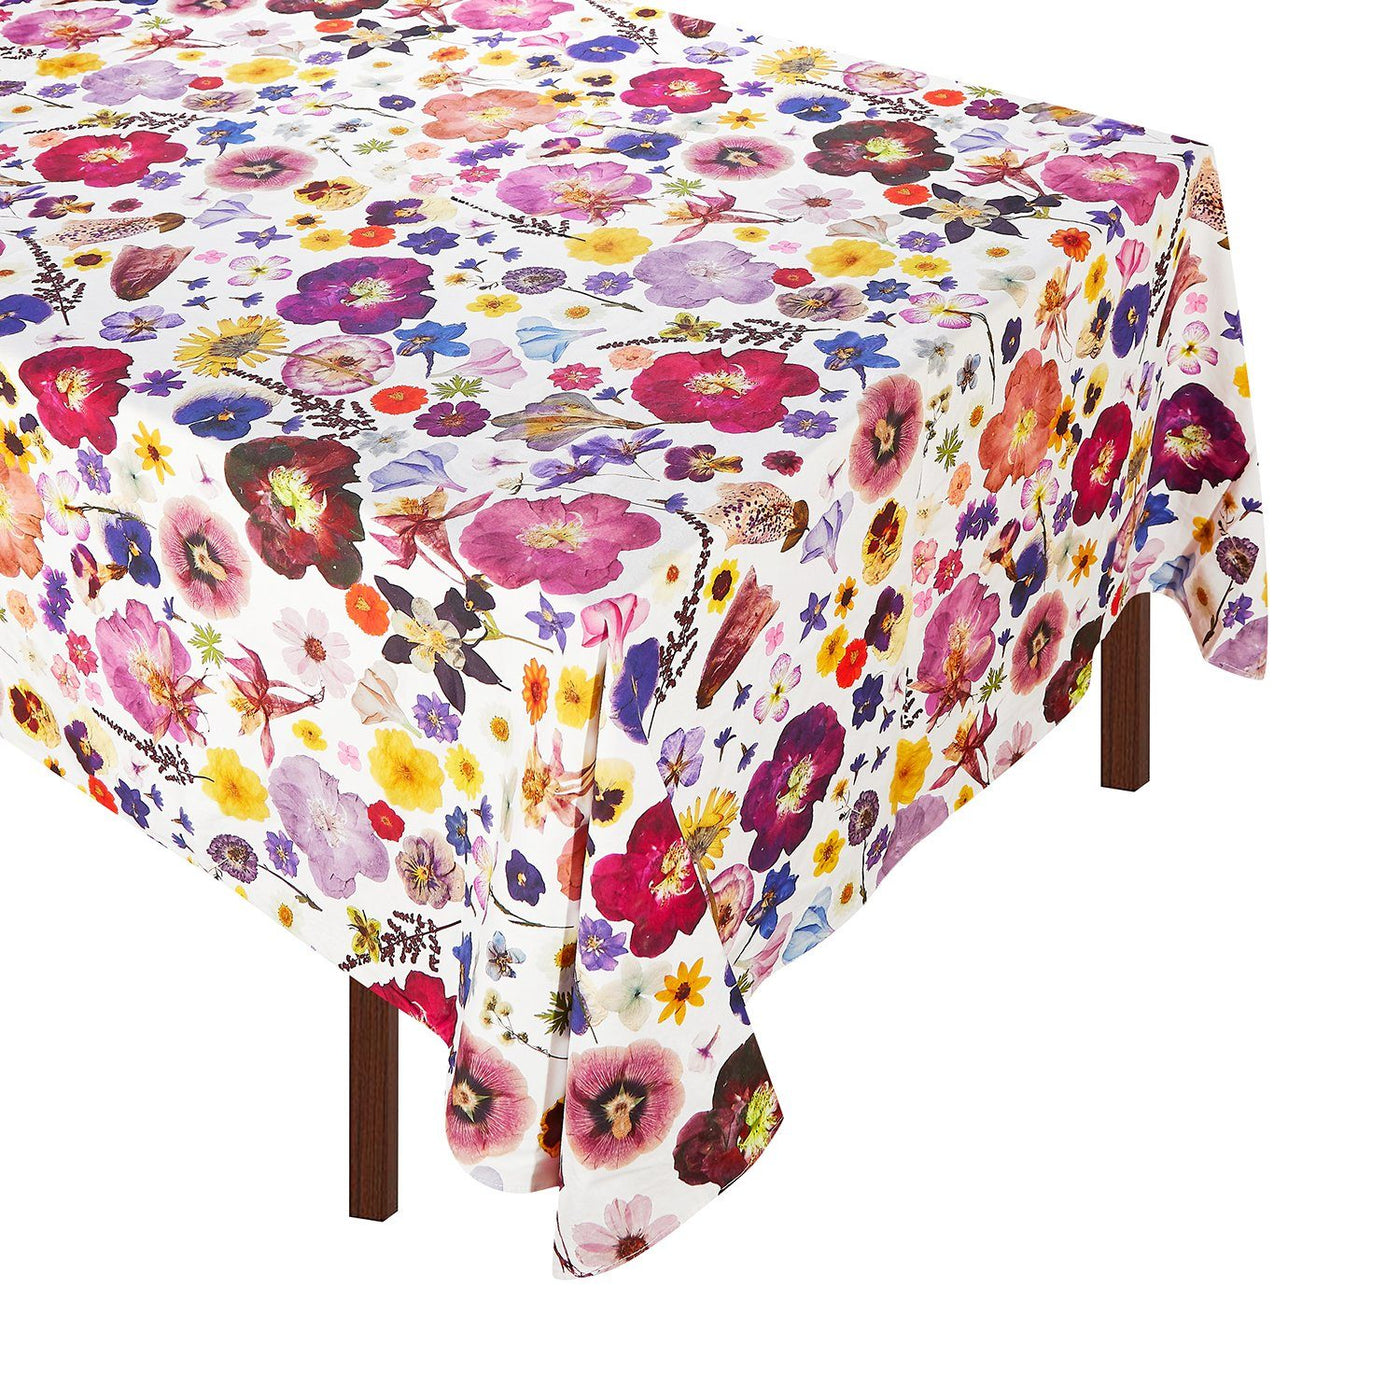 Pressed Flower Tablecloth Multicolored Chefanie 